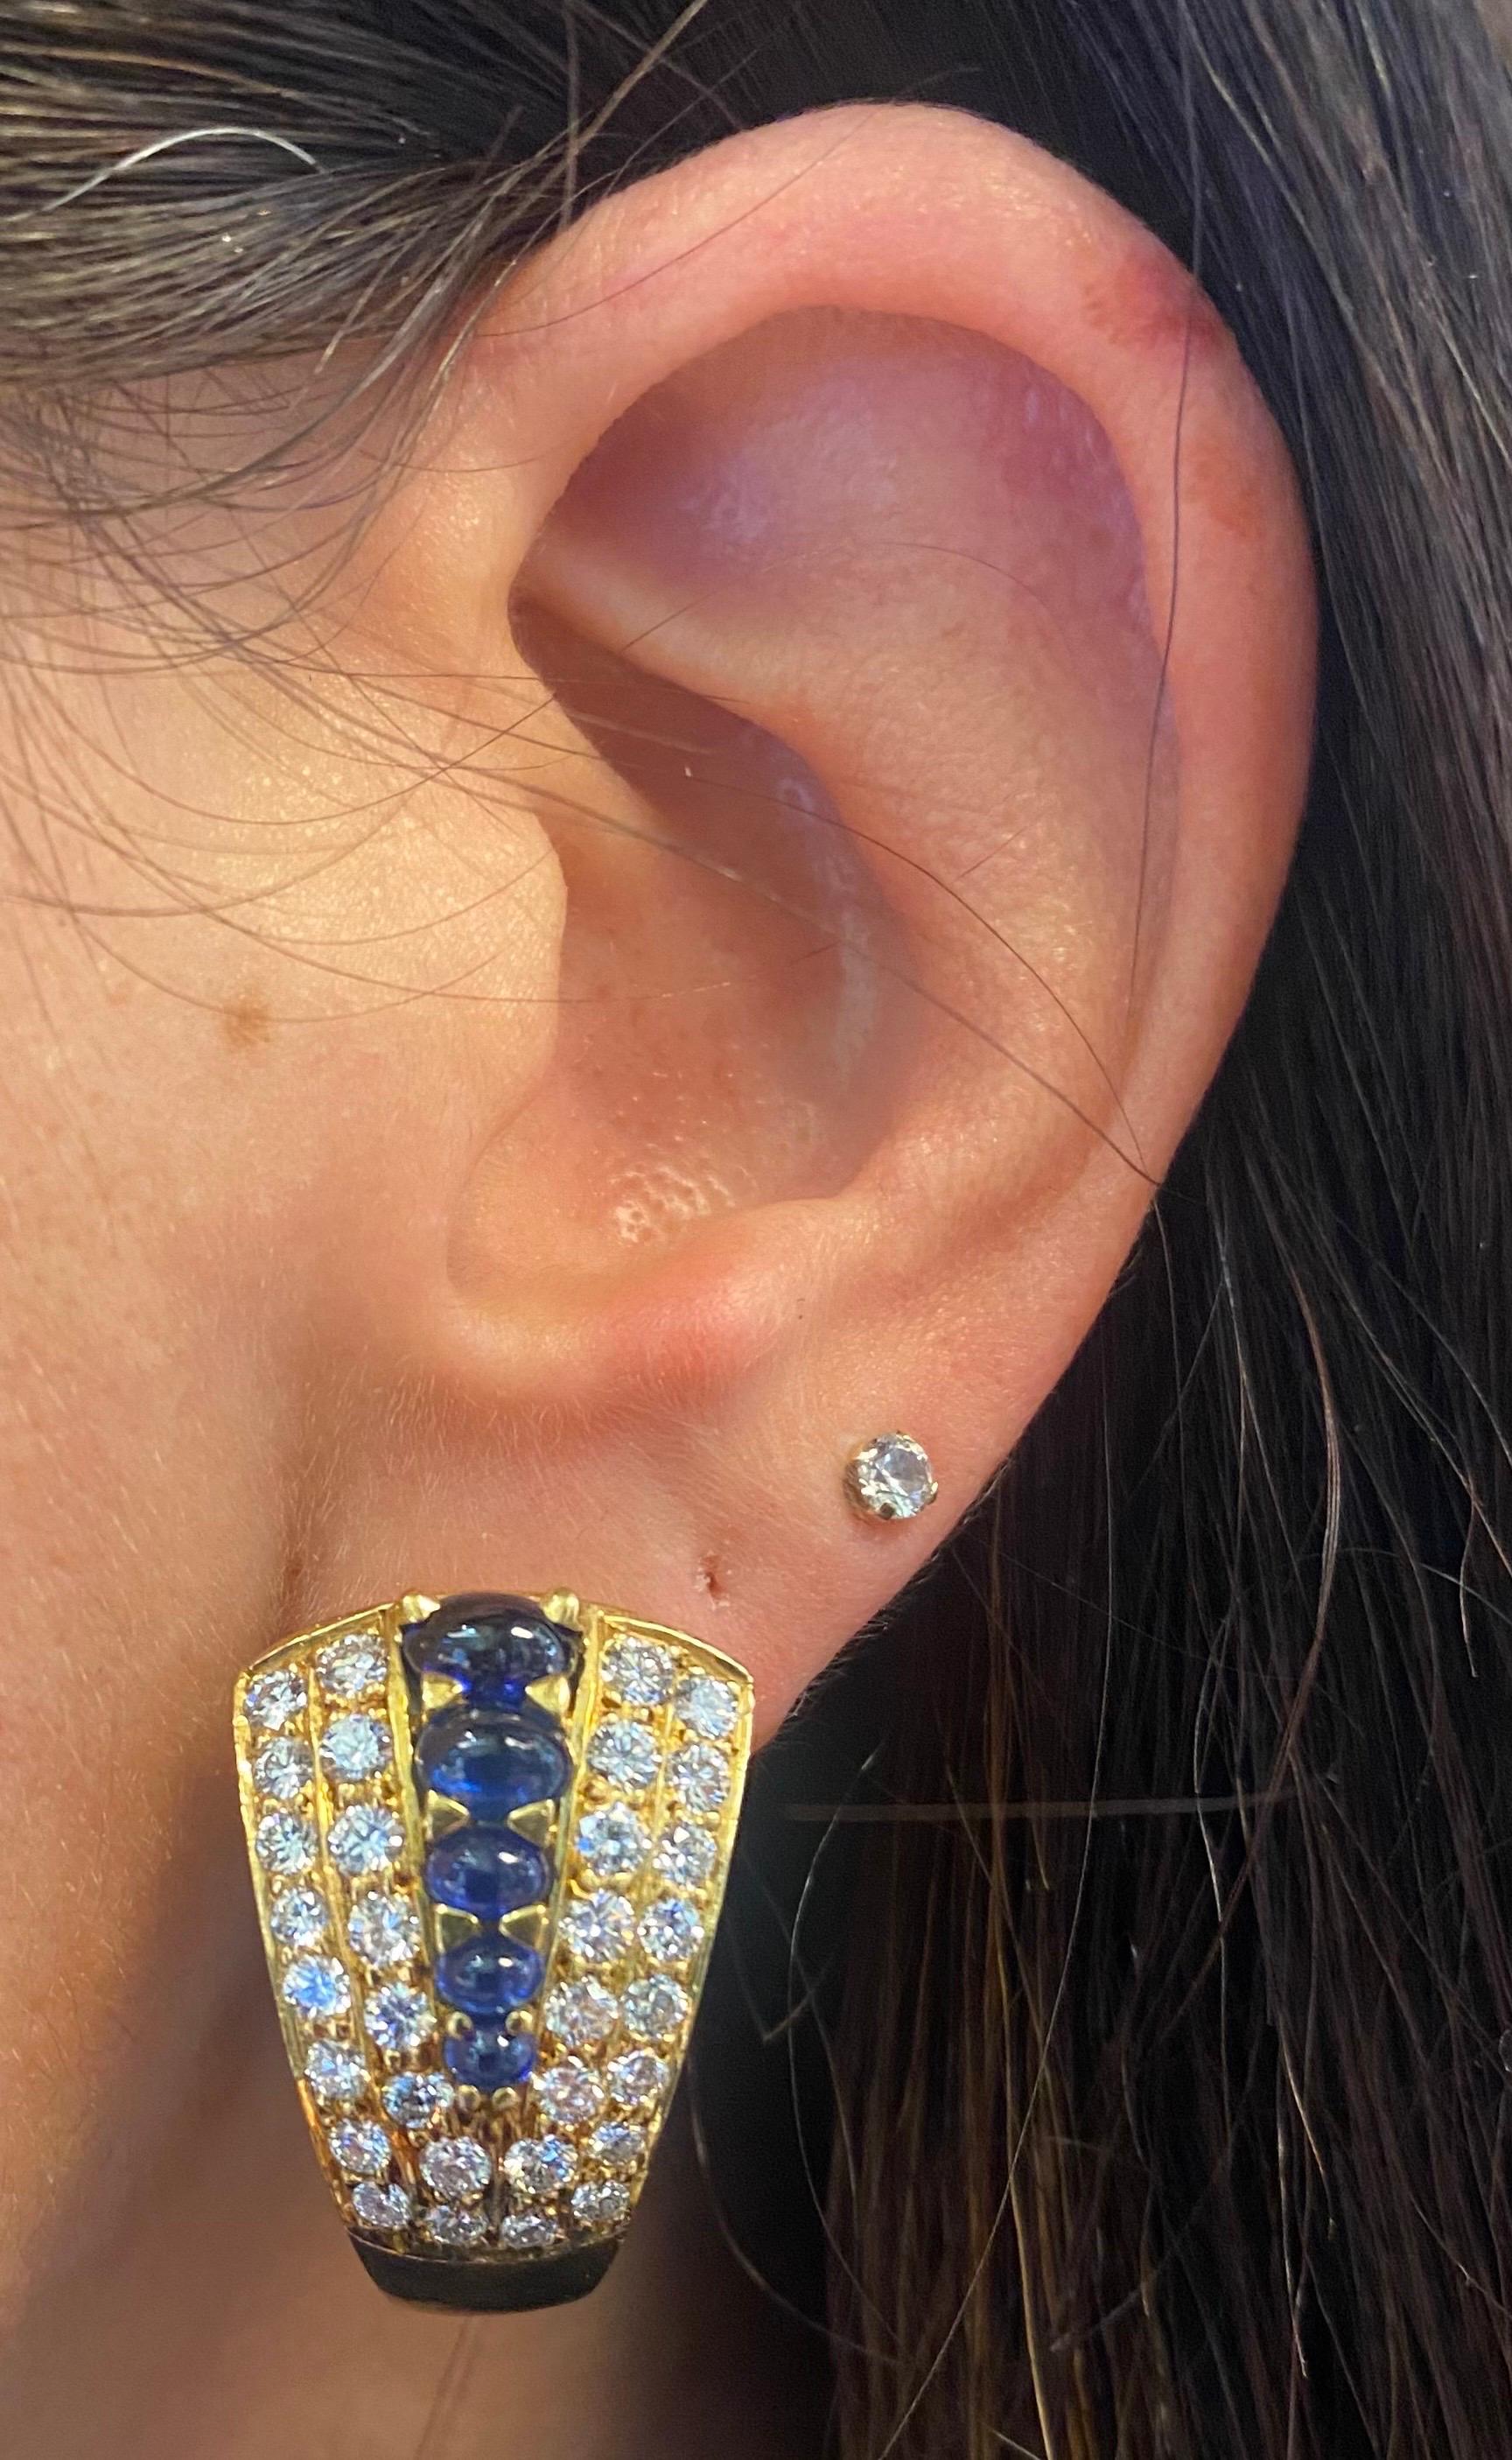 Sapphire and Diamond Earrings 

A pair of clip-on earrings set with 10 cabochon sapphires and 64 round-cut diamonds. 

Approximate Diamond Weight: 3.15 carats
Approximate Sapphire Weight: 2.55 carats
Approximately Measures 1